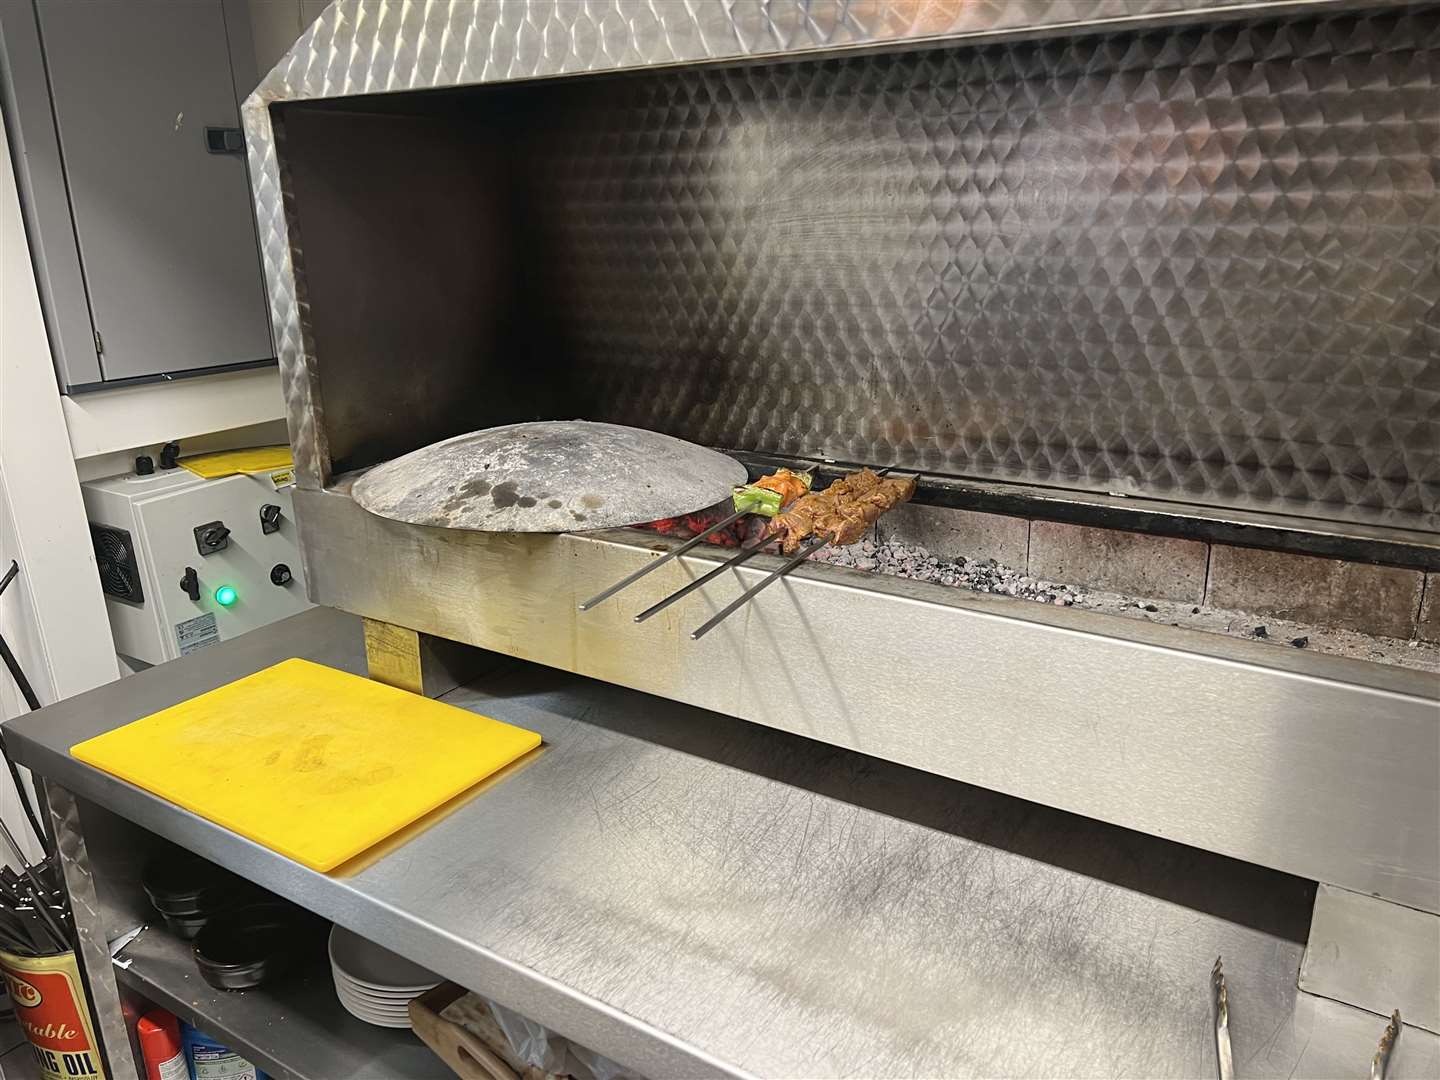 The grill at the Cinar Kitchen. Picture: Megan Carr